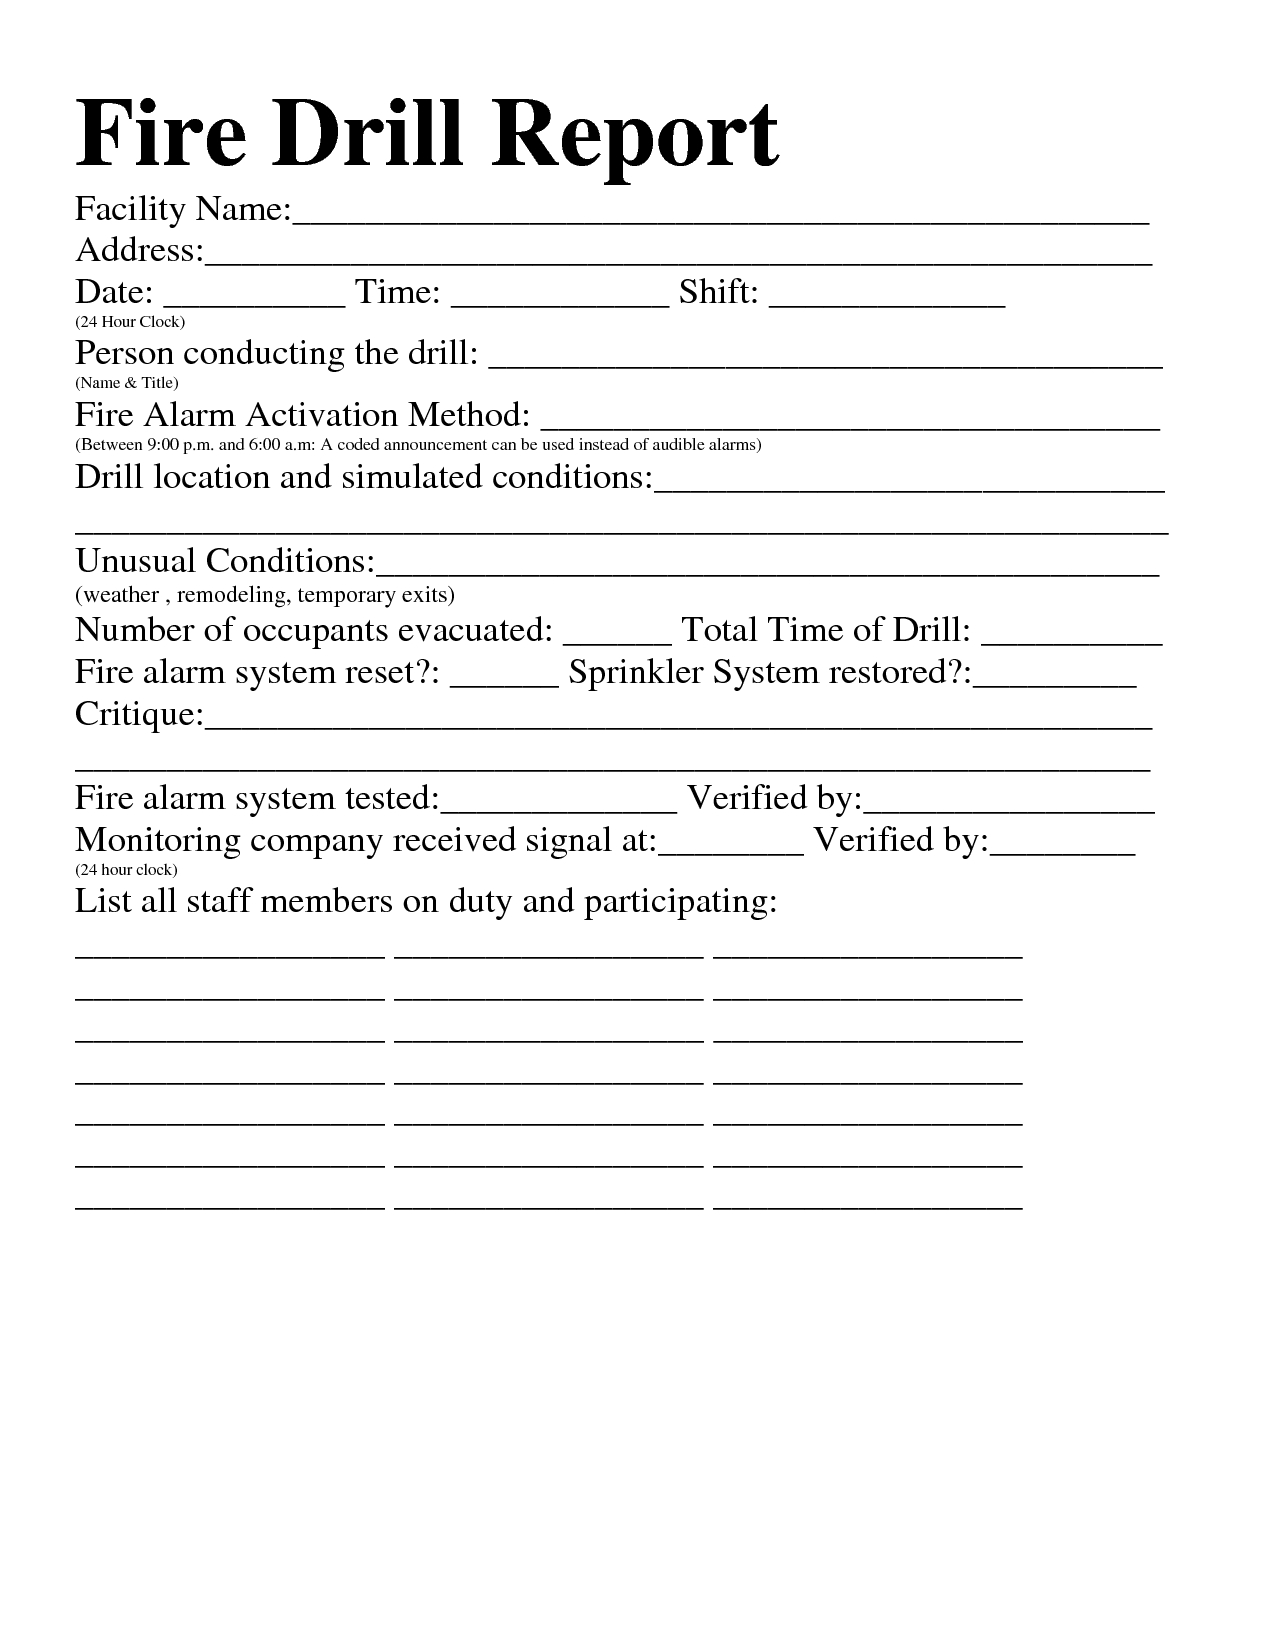 22 Images Of Osha Fire Drill Safety Template | Jackmonster Regarding Fire Evacuation Drill Report Template